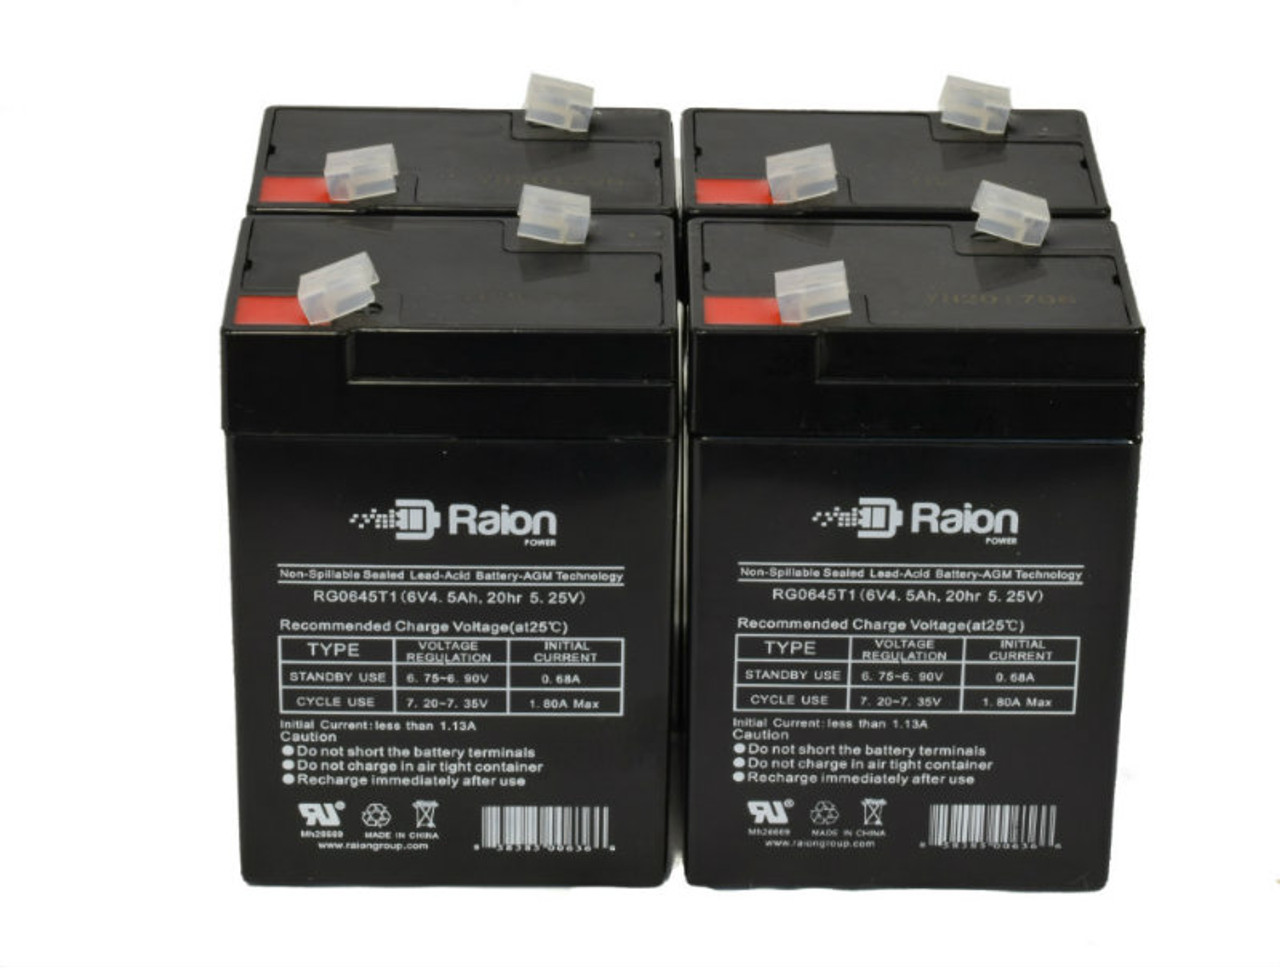 Raion Power 6V 4.5Ah Replacement Emergency Light Battery for ELS ELS FRX - 4 Pack